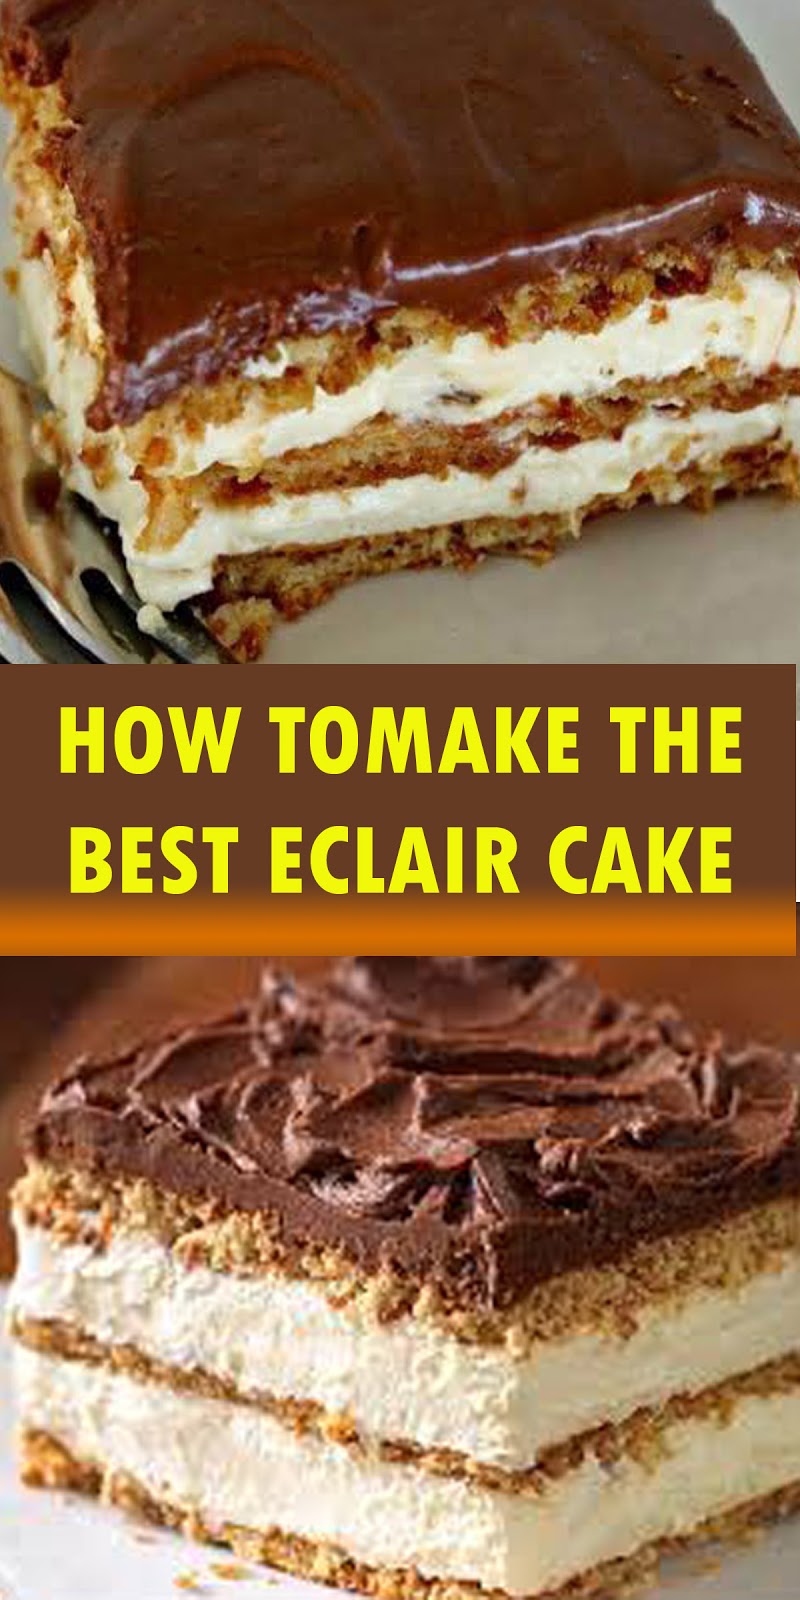 HOW TOMAKE THE BEST ECLAIR CAKE NO BAKE THE BEST AND